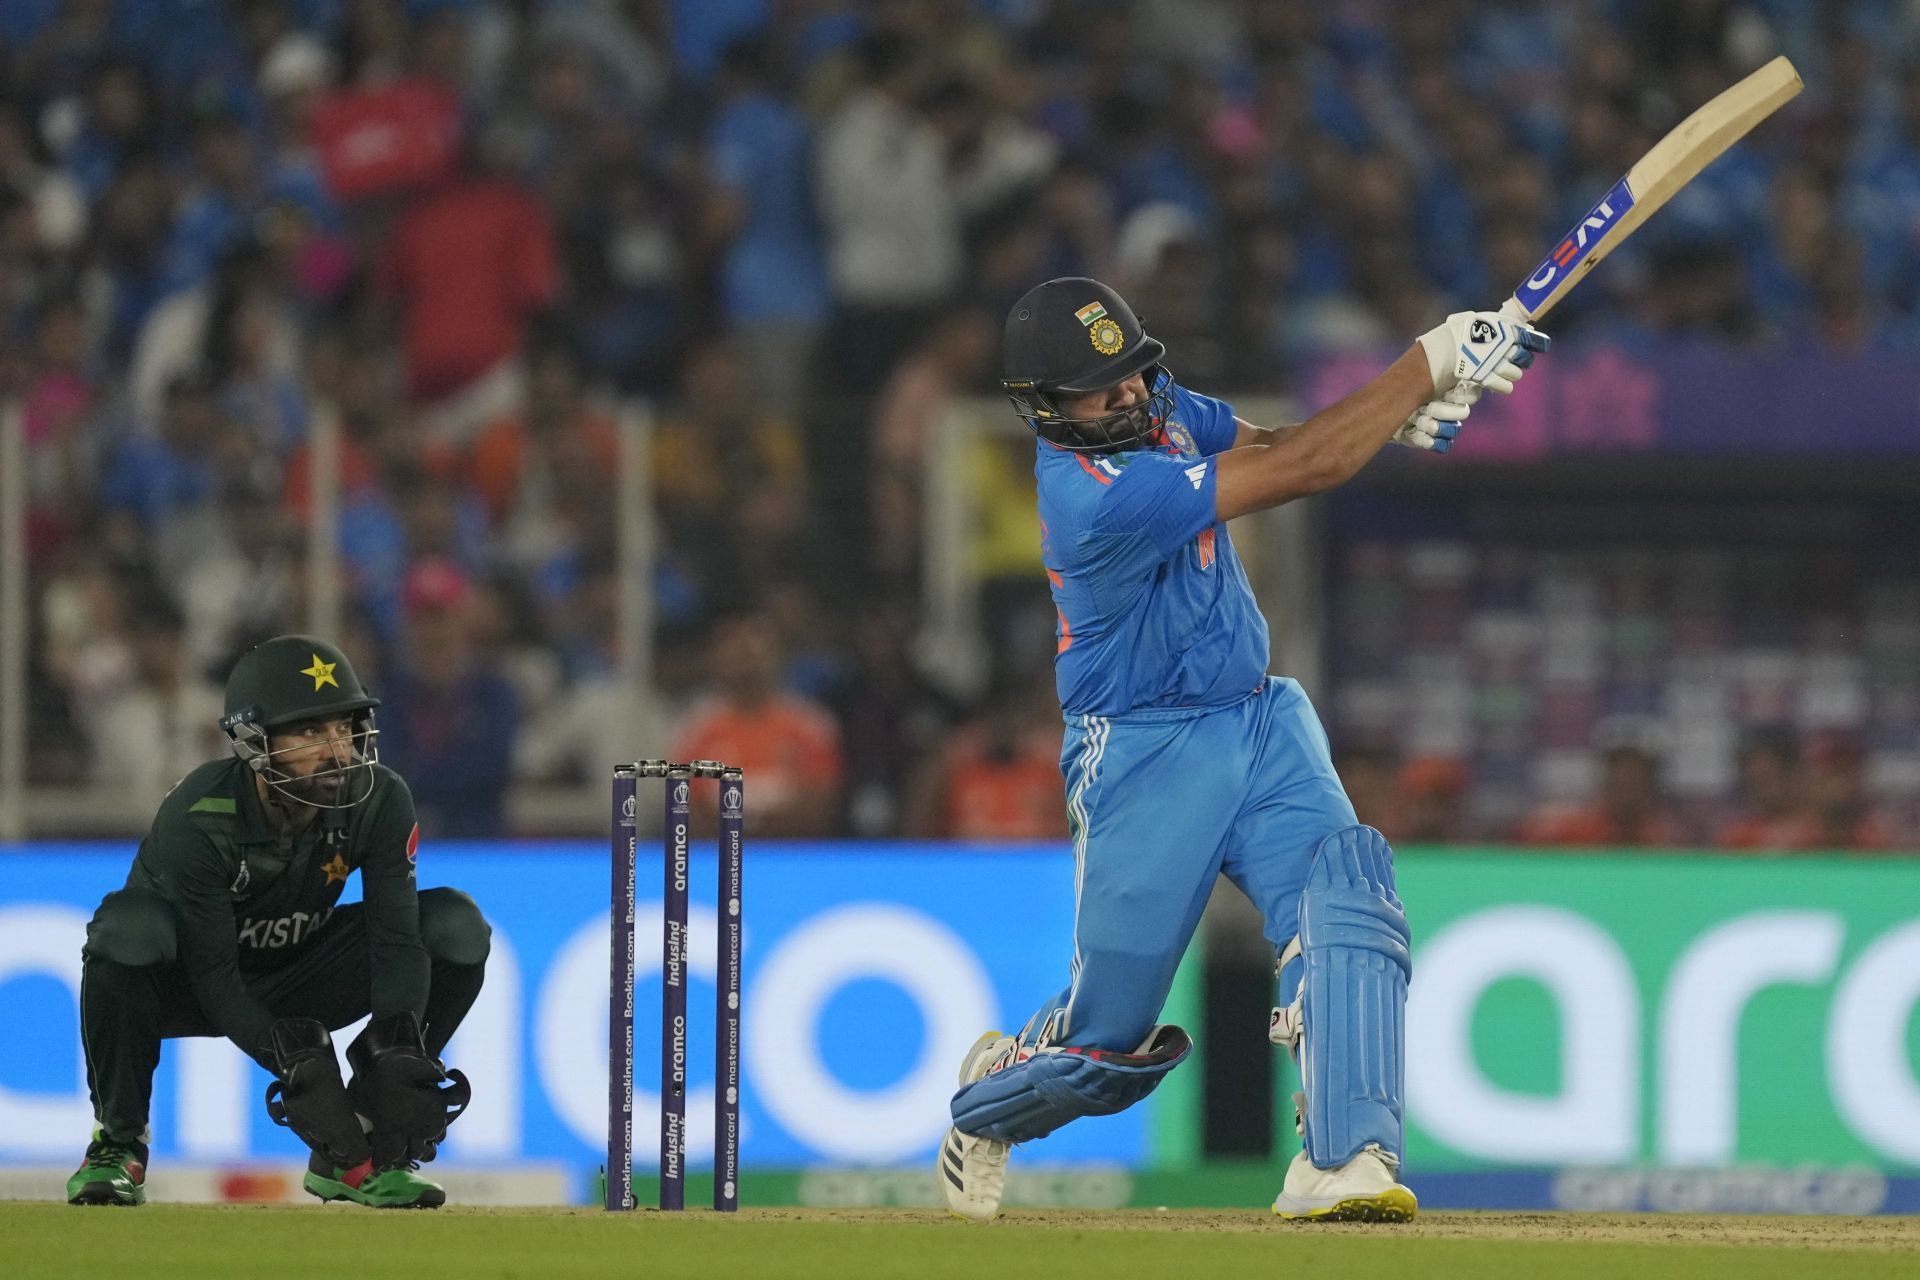 Rohit Sharma has smashed 22 fours and 11 sixes in the tournament thus far. [P/C: AP]